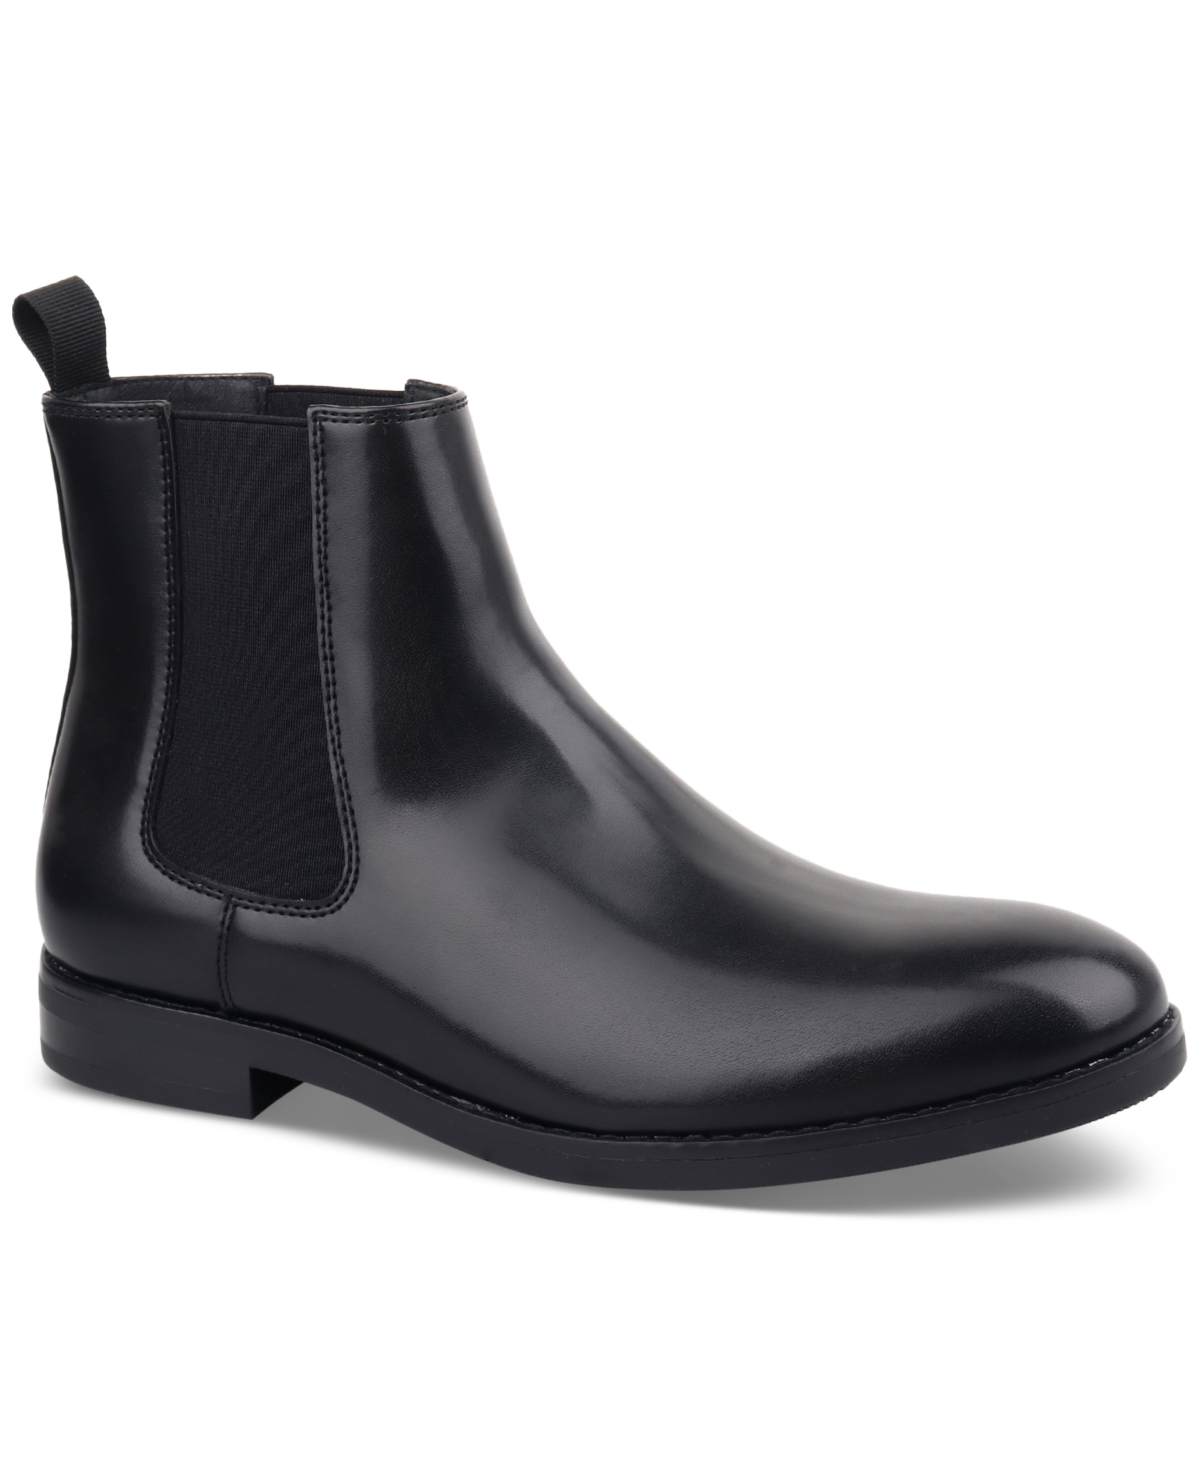 Men's Luka 2 Pull-On Chelsea Boots, Created for Macy's - Bordeaux